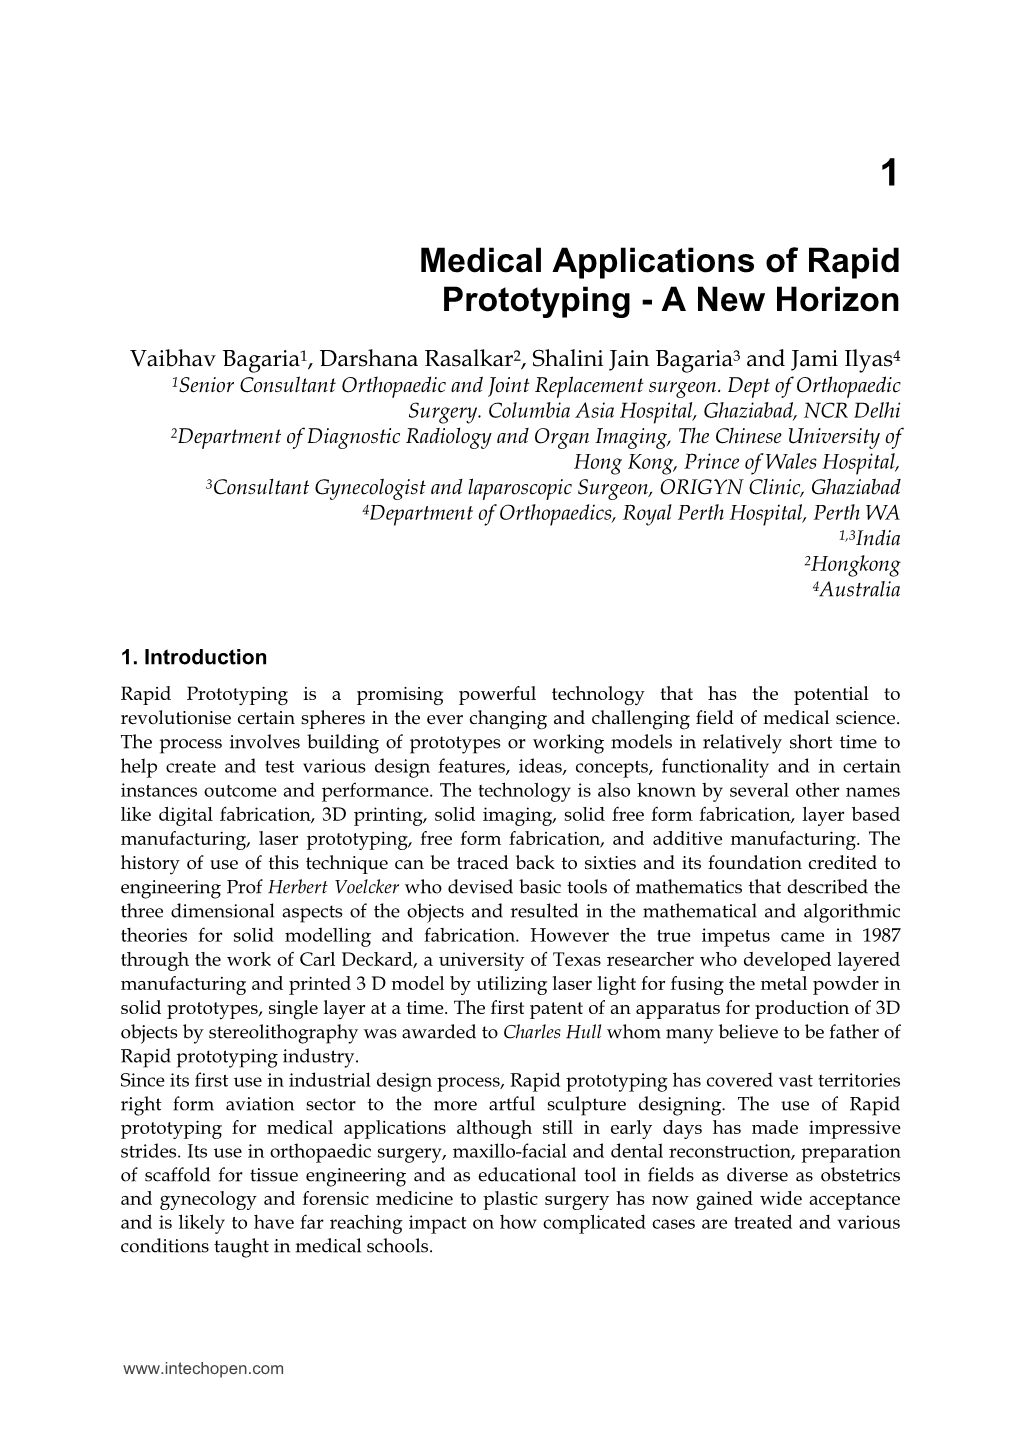 Medical Applications of Rapid Prototyping - a New Horizon